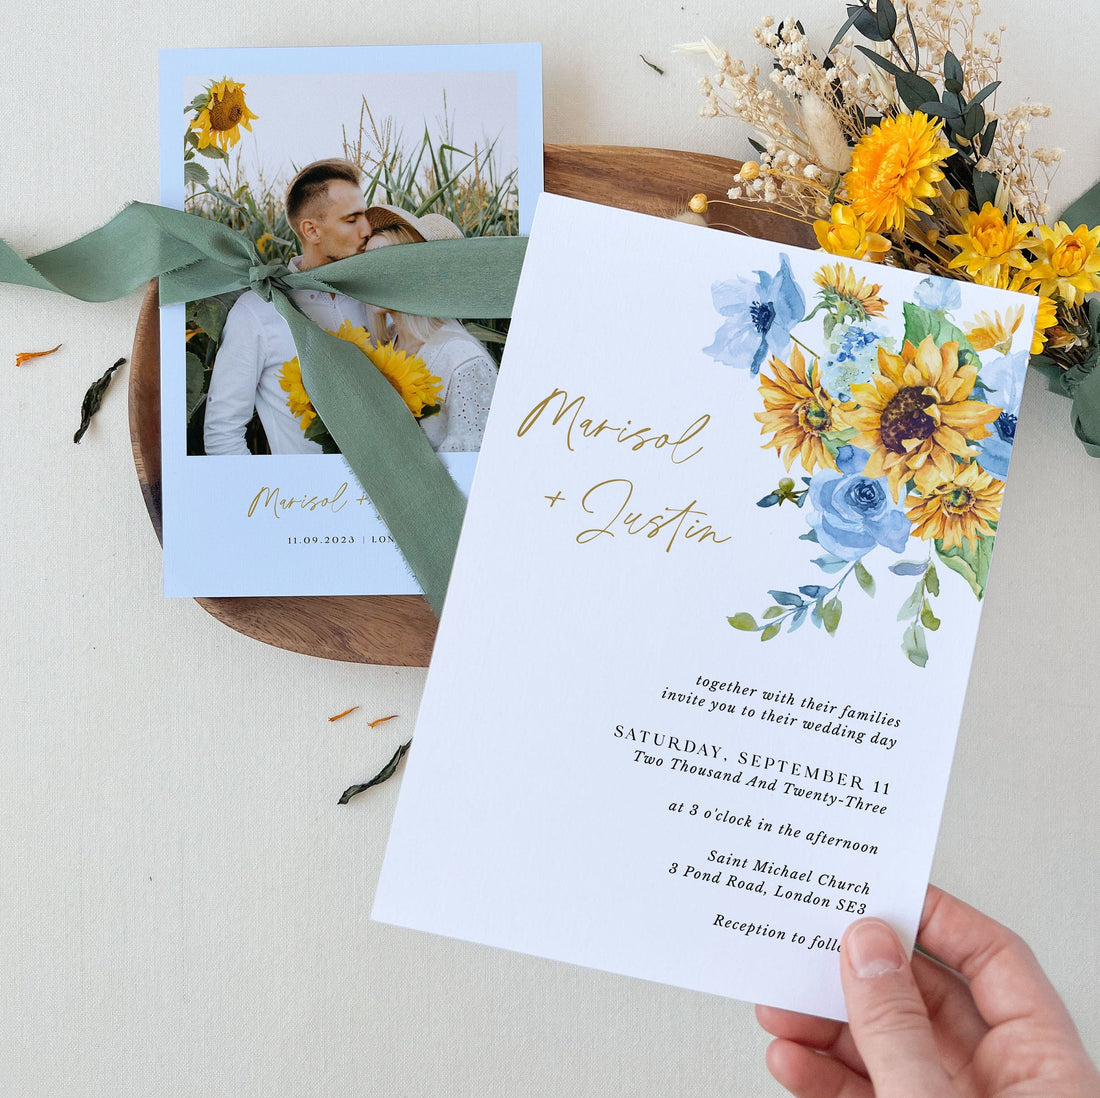 IVY Printable Rustic Wedding Invitations with Sunflowers